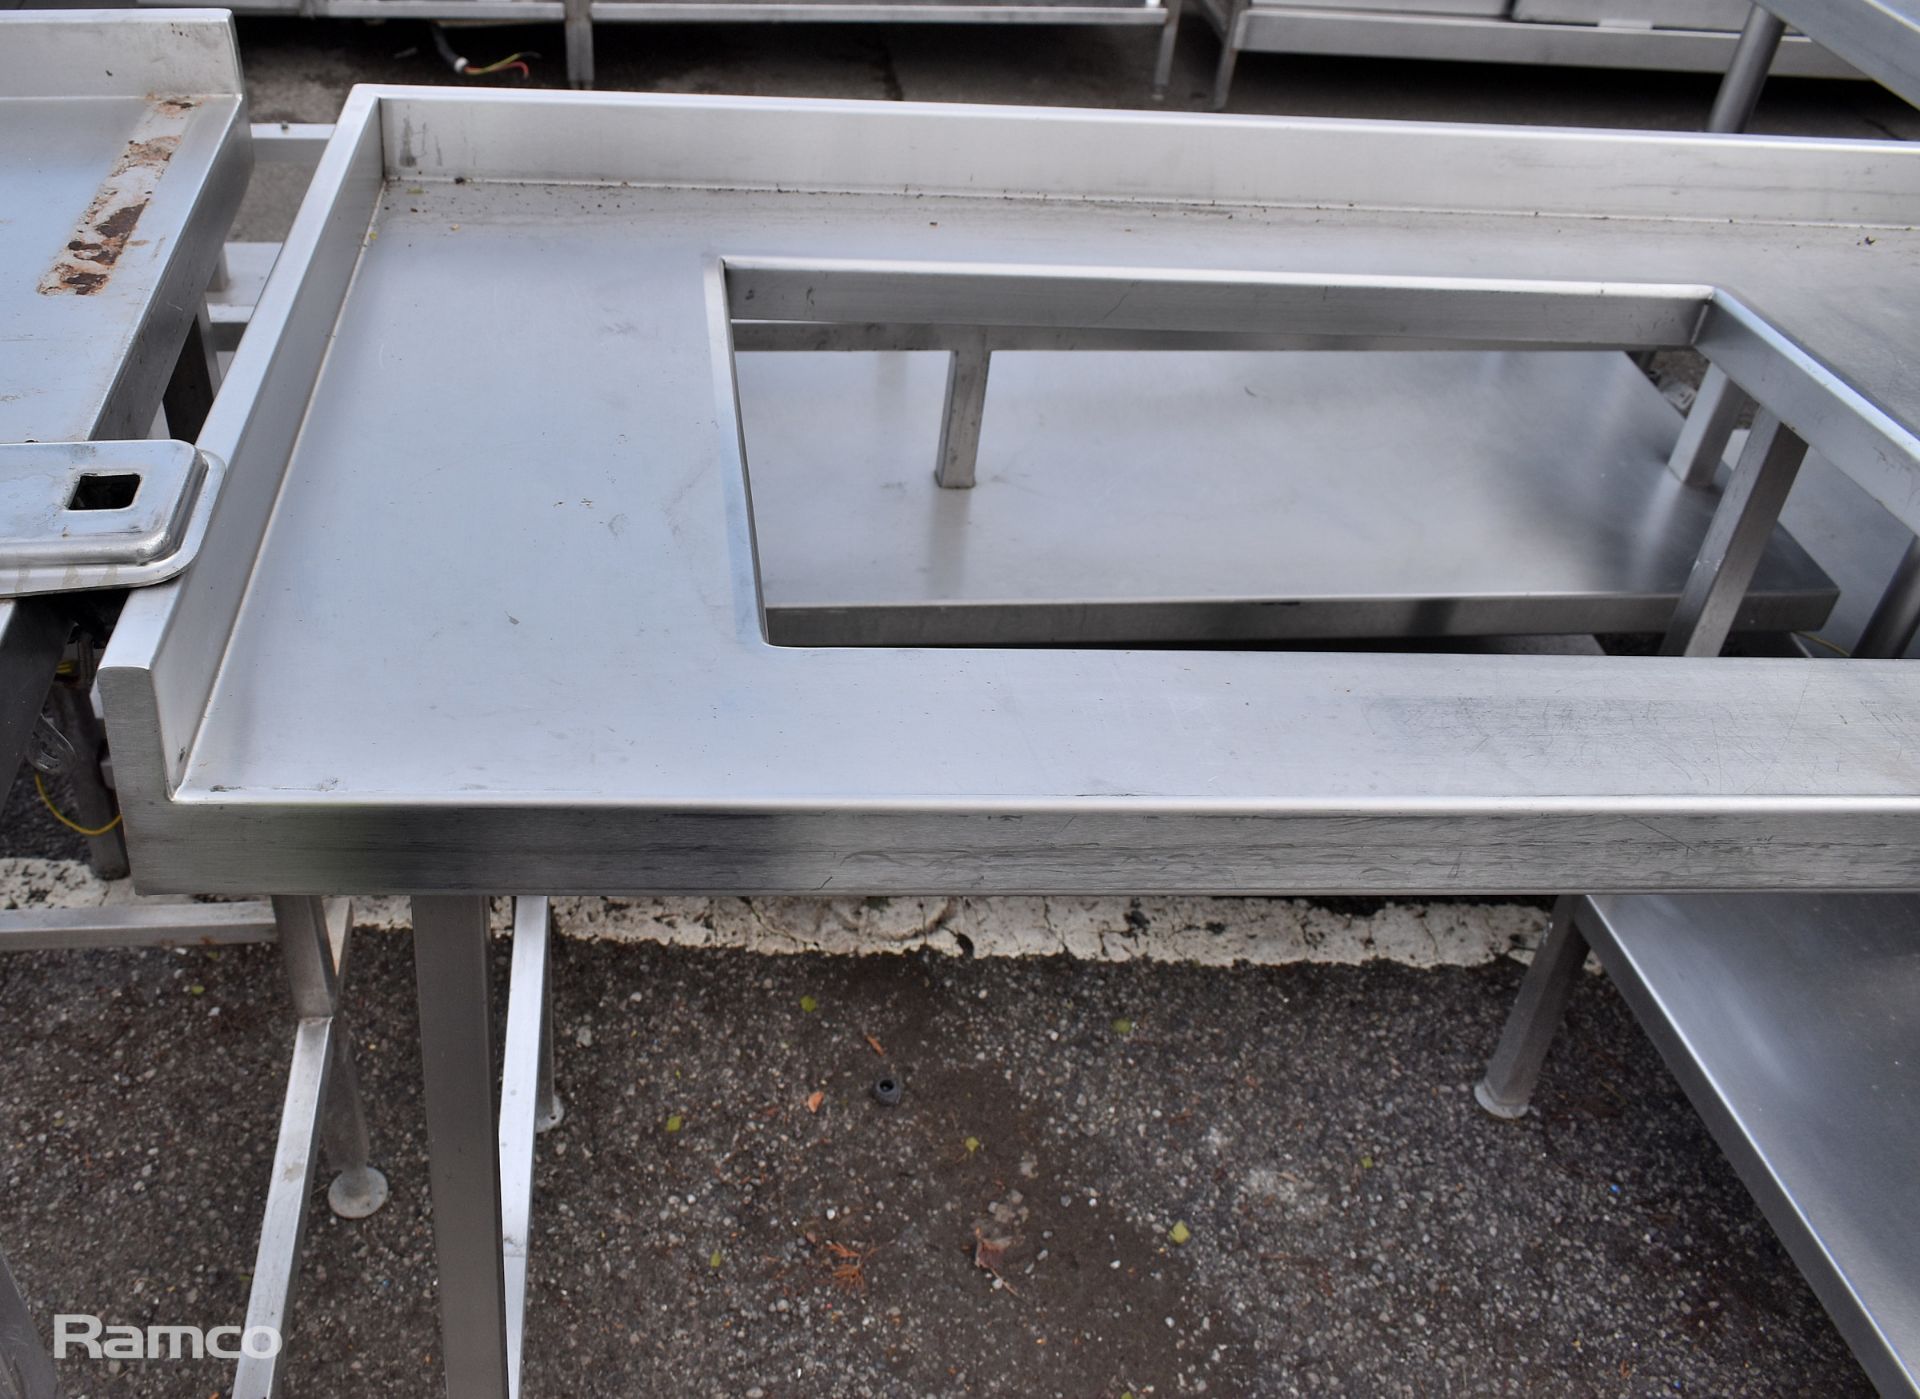 Stainless steel table with bottom shelf and rectangular cut out - L 193 x W 70 x H 90cm - Image 3 of 4